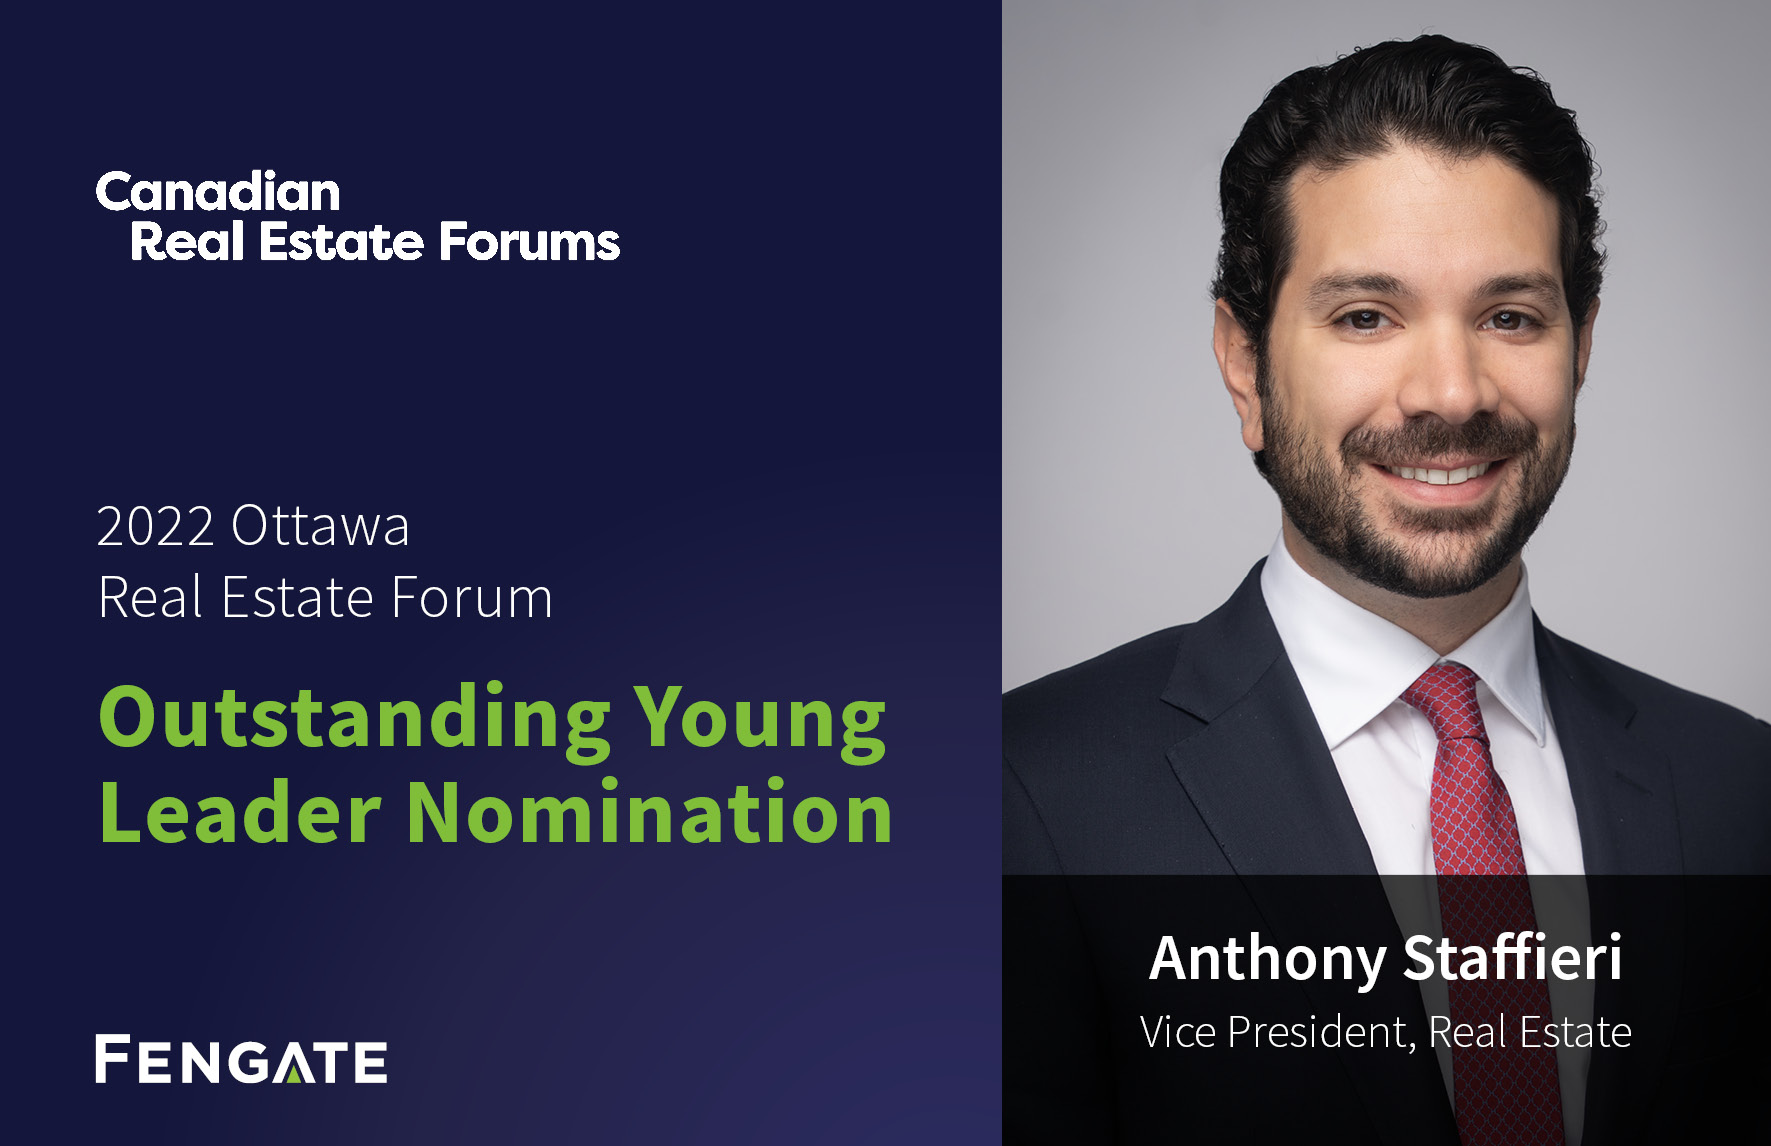 Anthony Staffieri nominated for Outstanding Young Leader Award